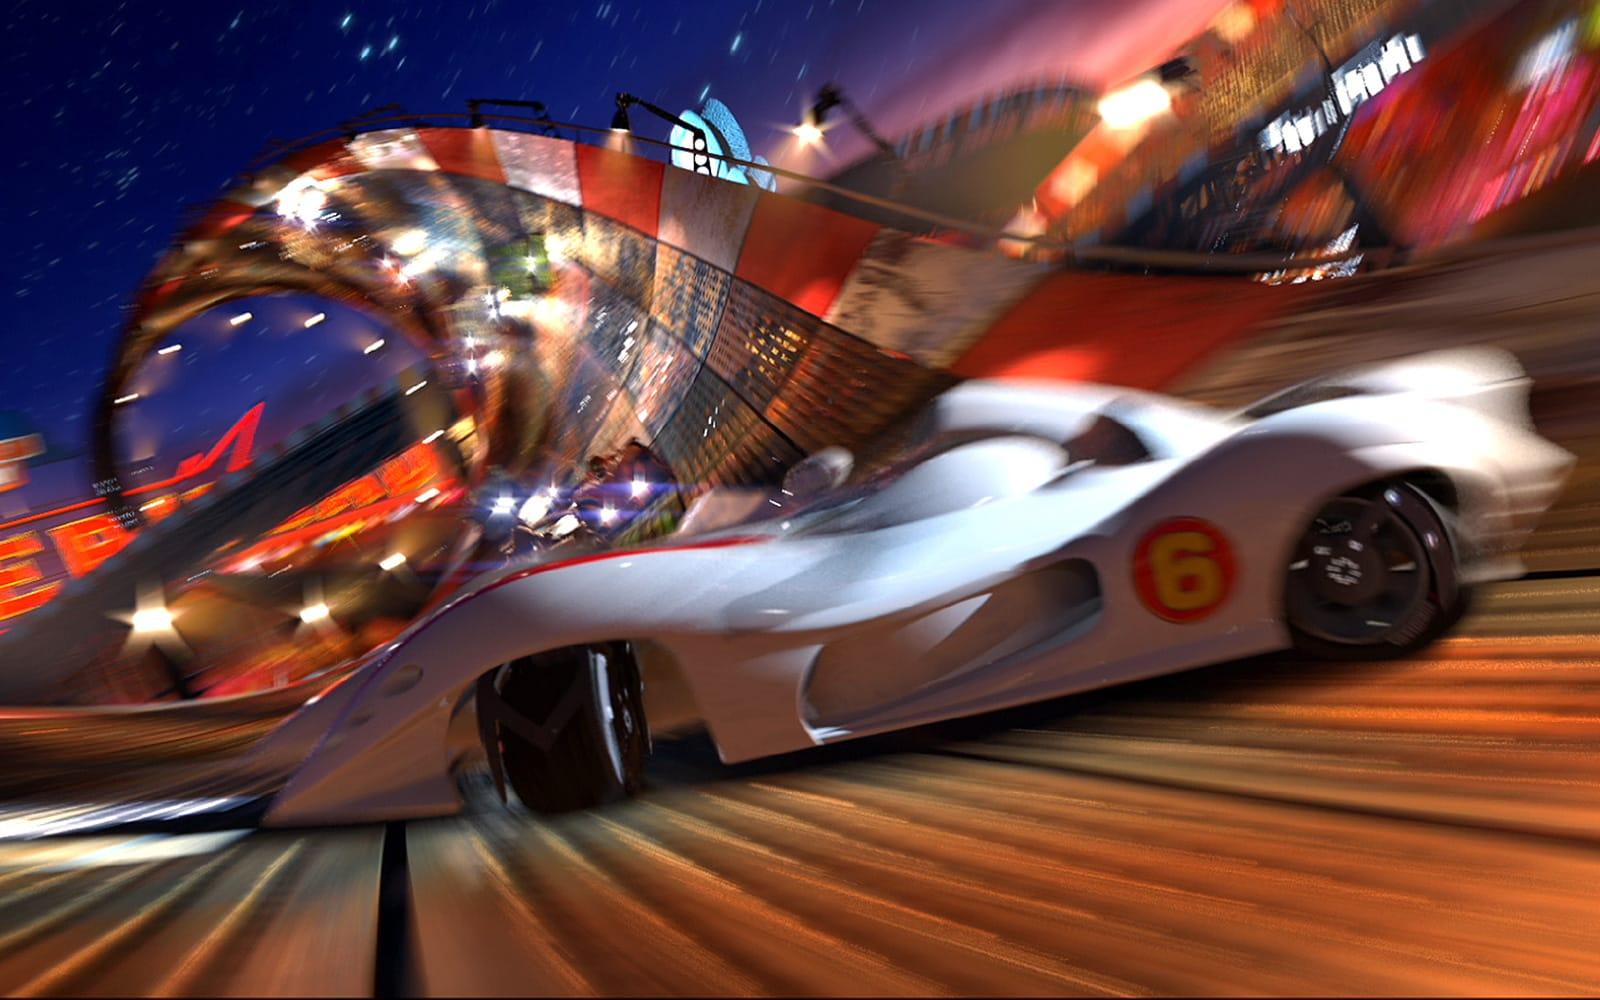 Speed Racer - The Wachowskis